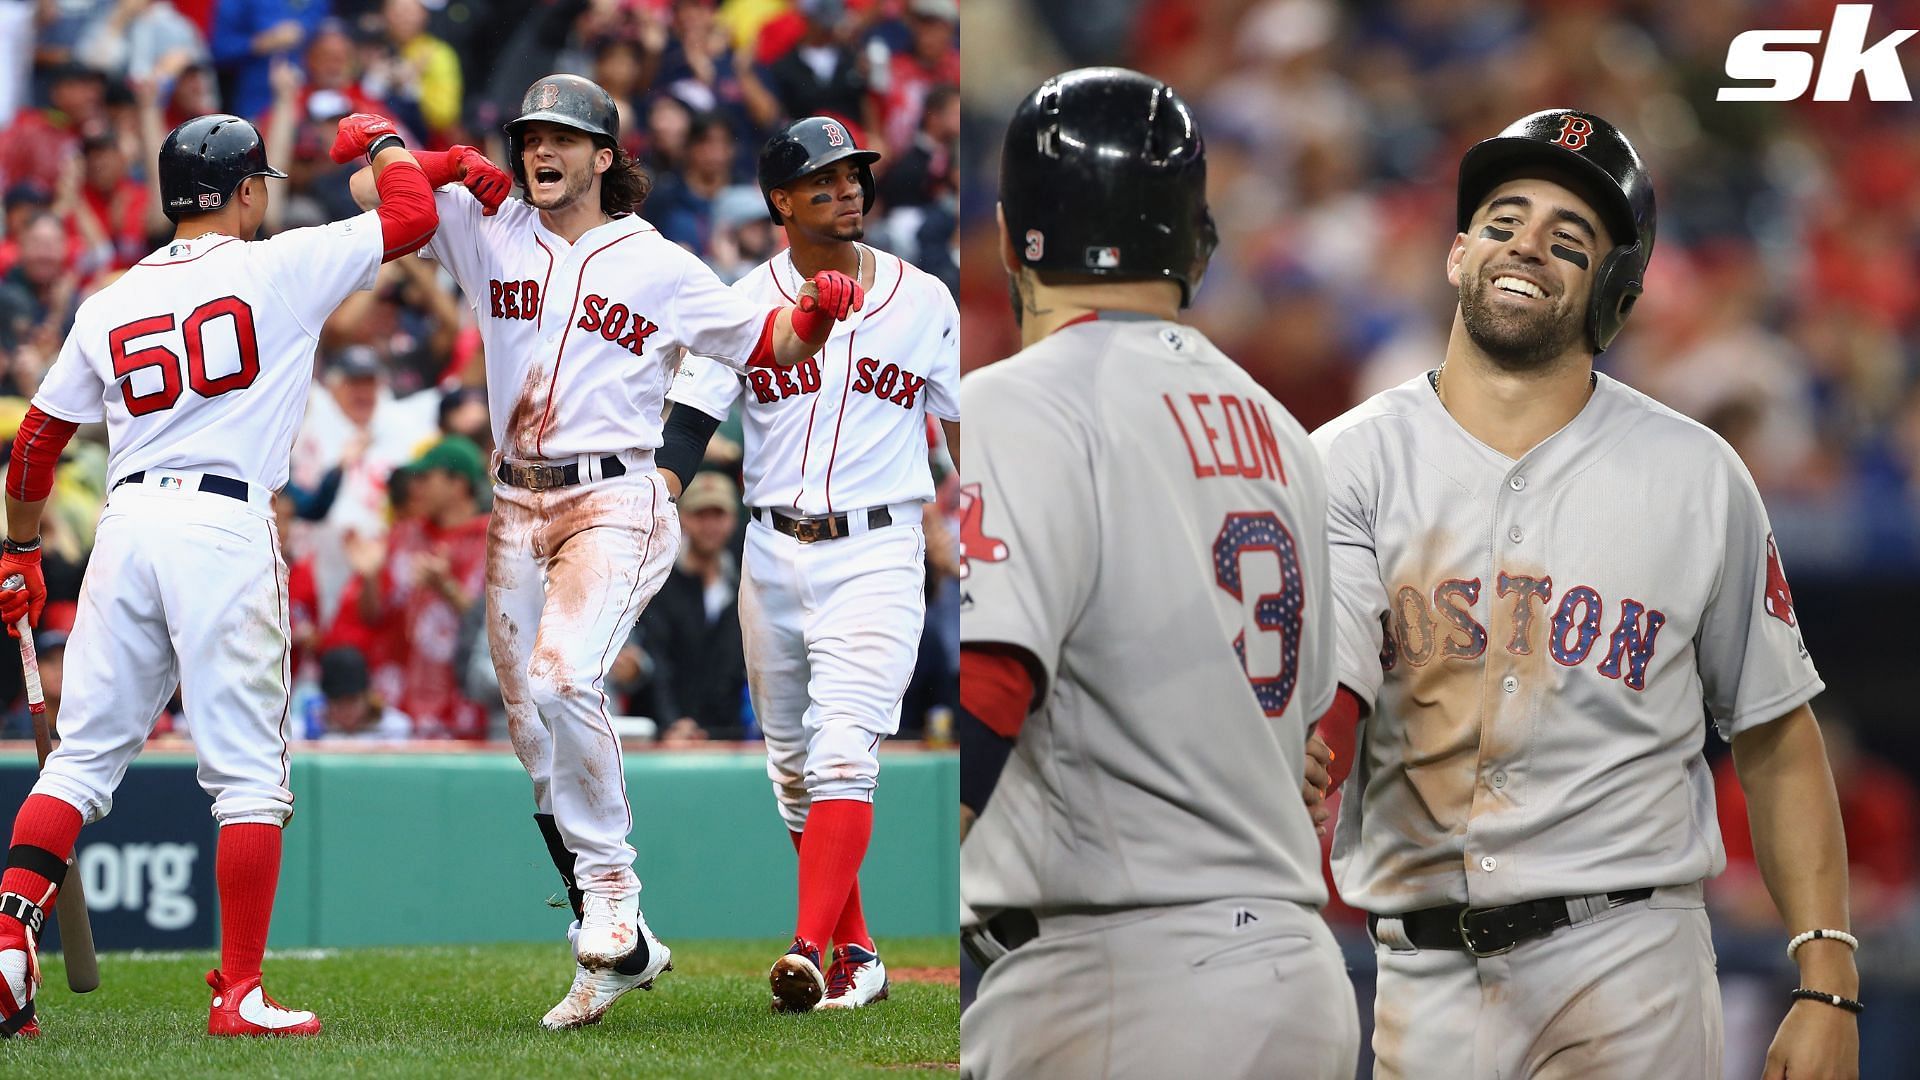 Deven Marrero recalls time when a ghost pepper challenge incapacitated Red Sox teammates